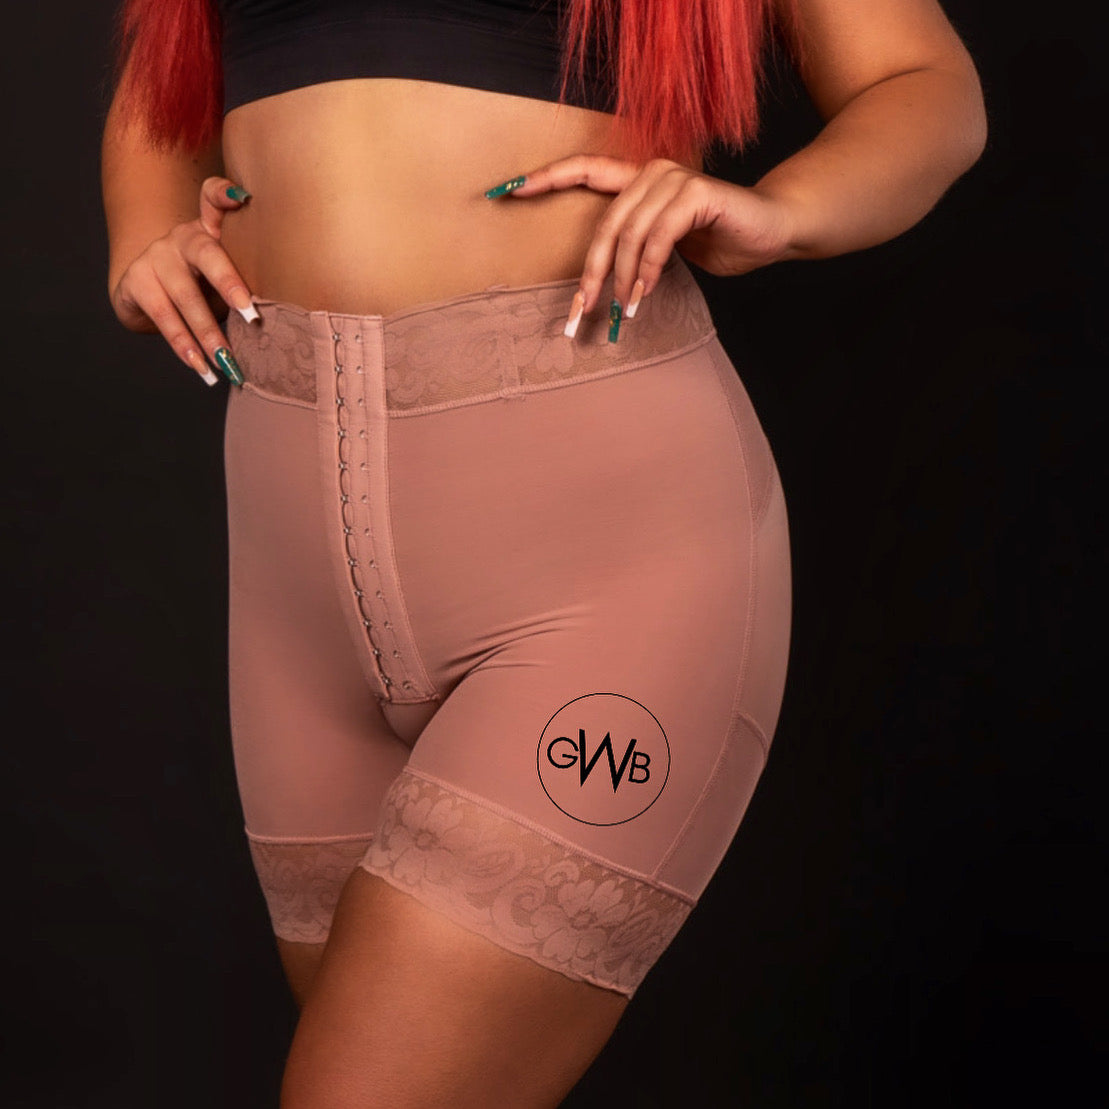 Butt Lifting Shapewear Shorts for Women - Removable Snatch Me Up